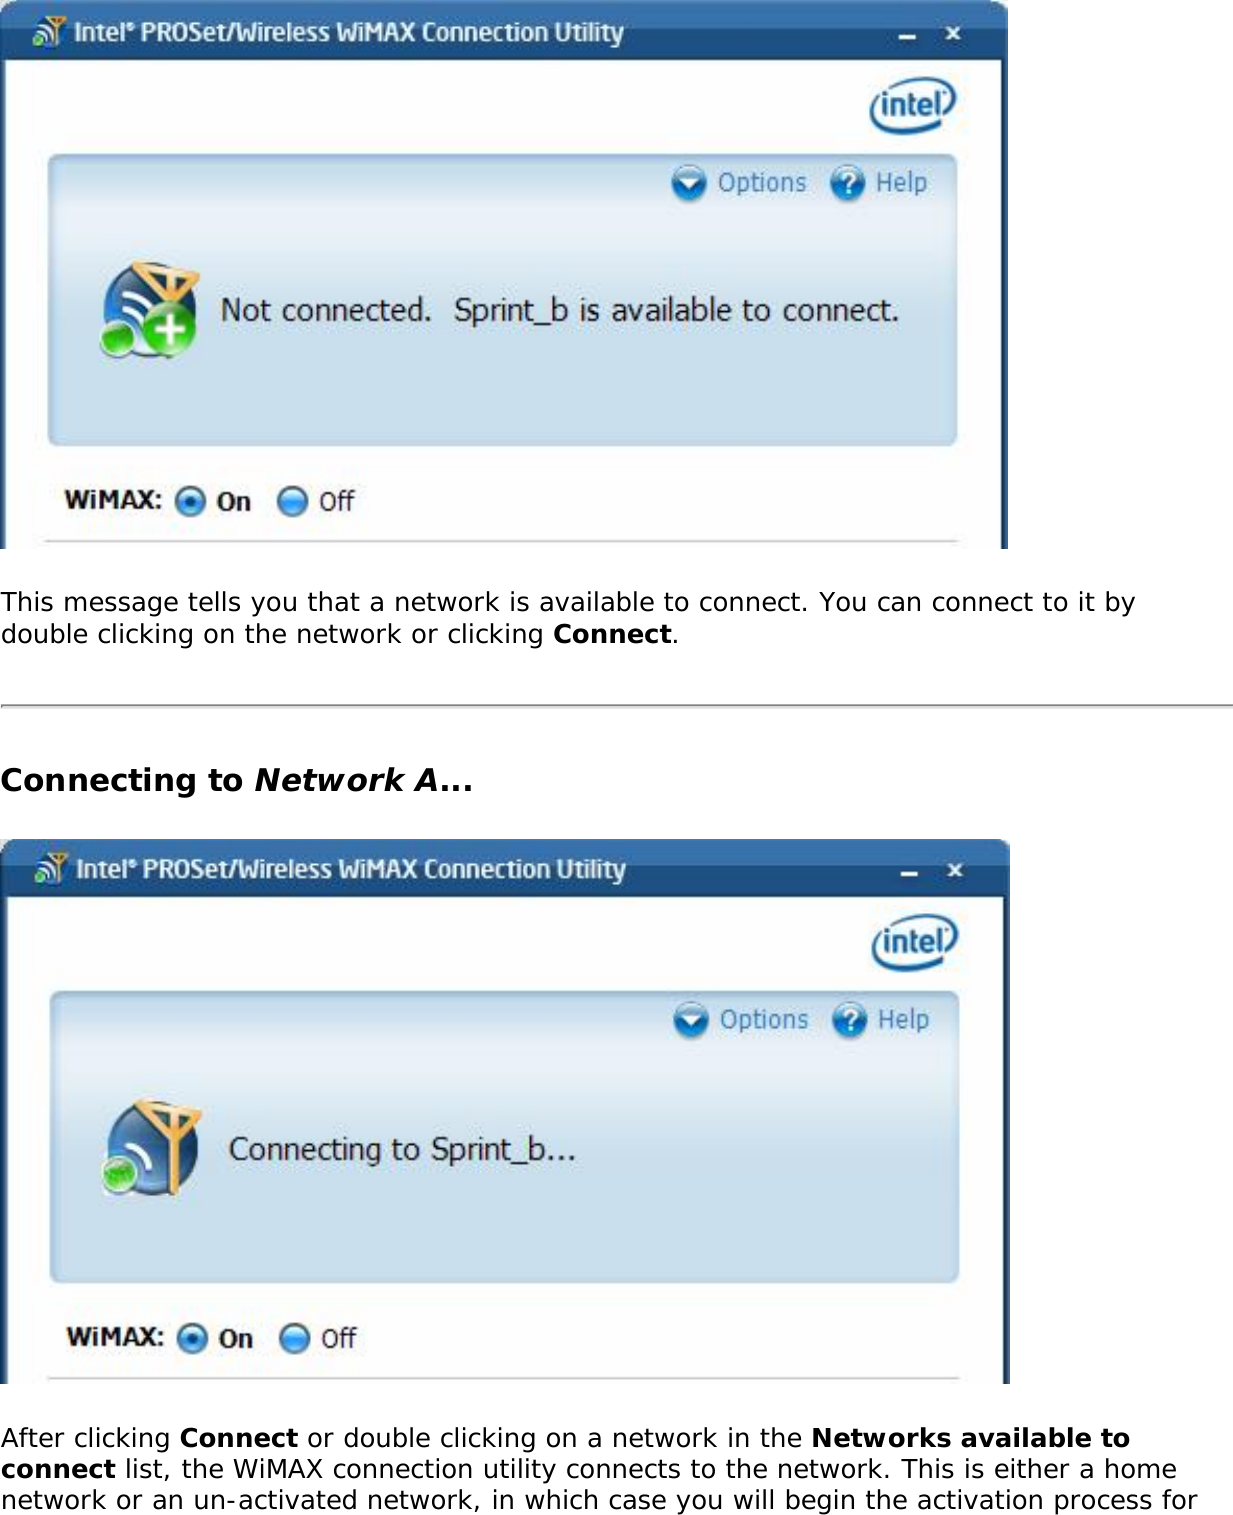 This message tells you that a network is available to connect. You can connect to it by double clicking on the network or clicking Connect. Connecting to Network A... After clicking Connect or double clicking on a network in the Networks available to connect list, the WiMAX connection utility connects to the network. This is either a home network or an un-activated network, in which case you will begin the activation process for 